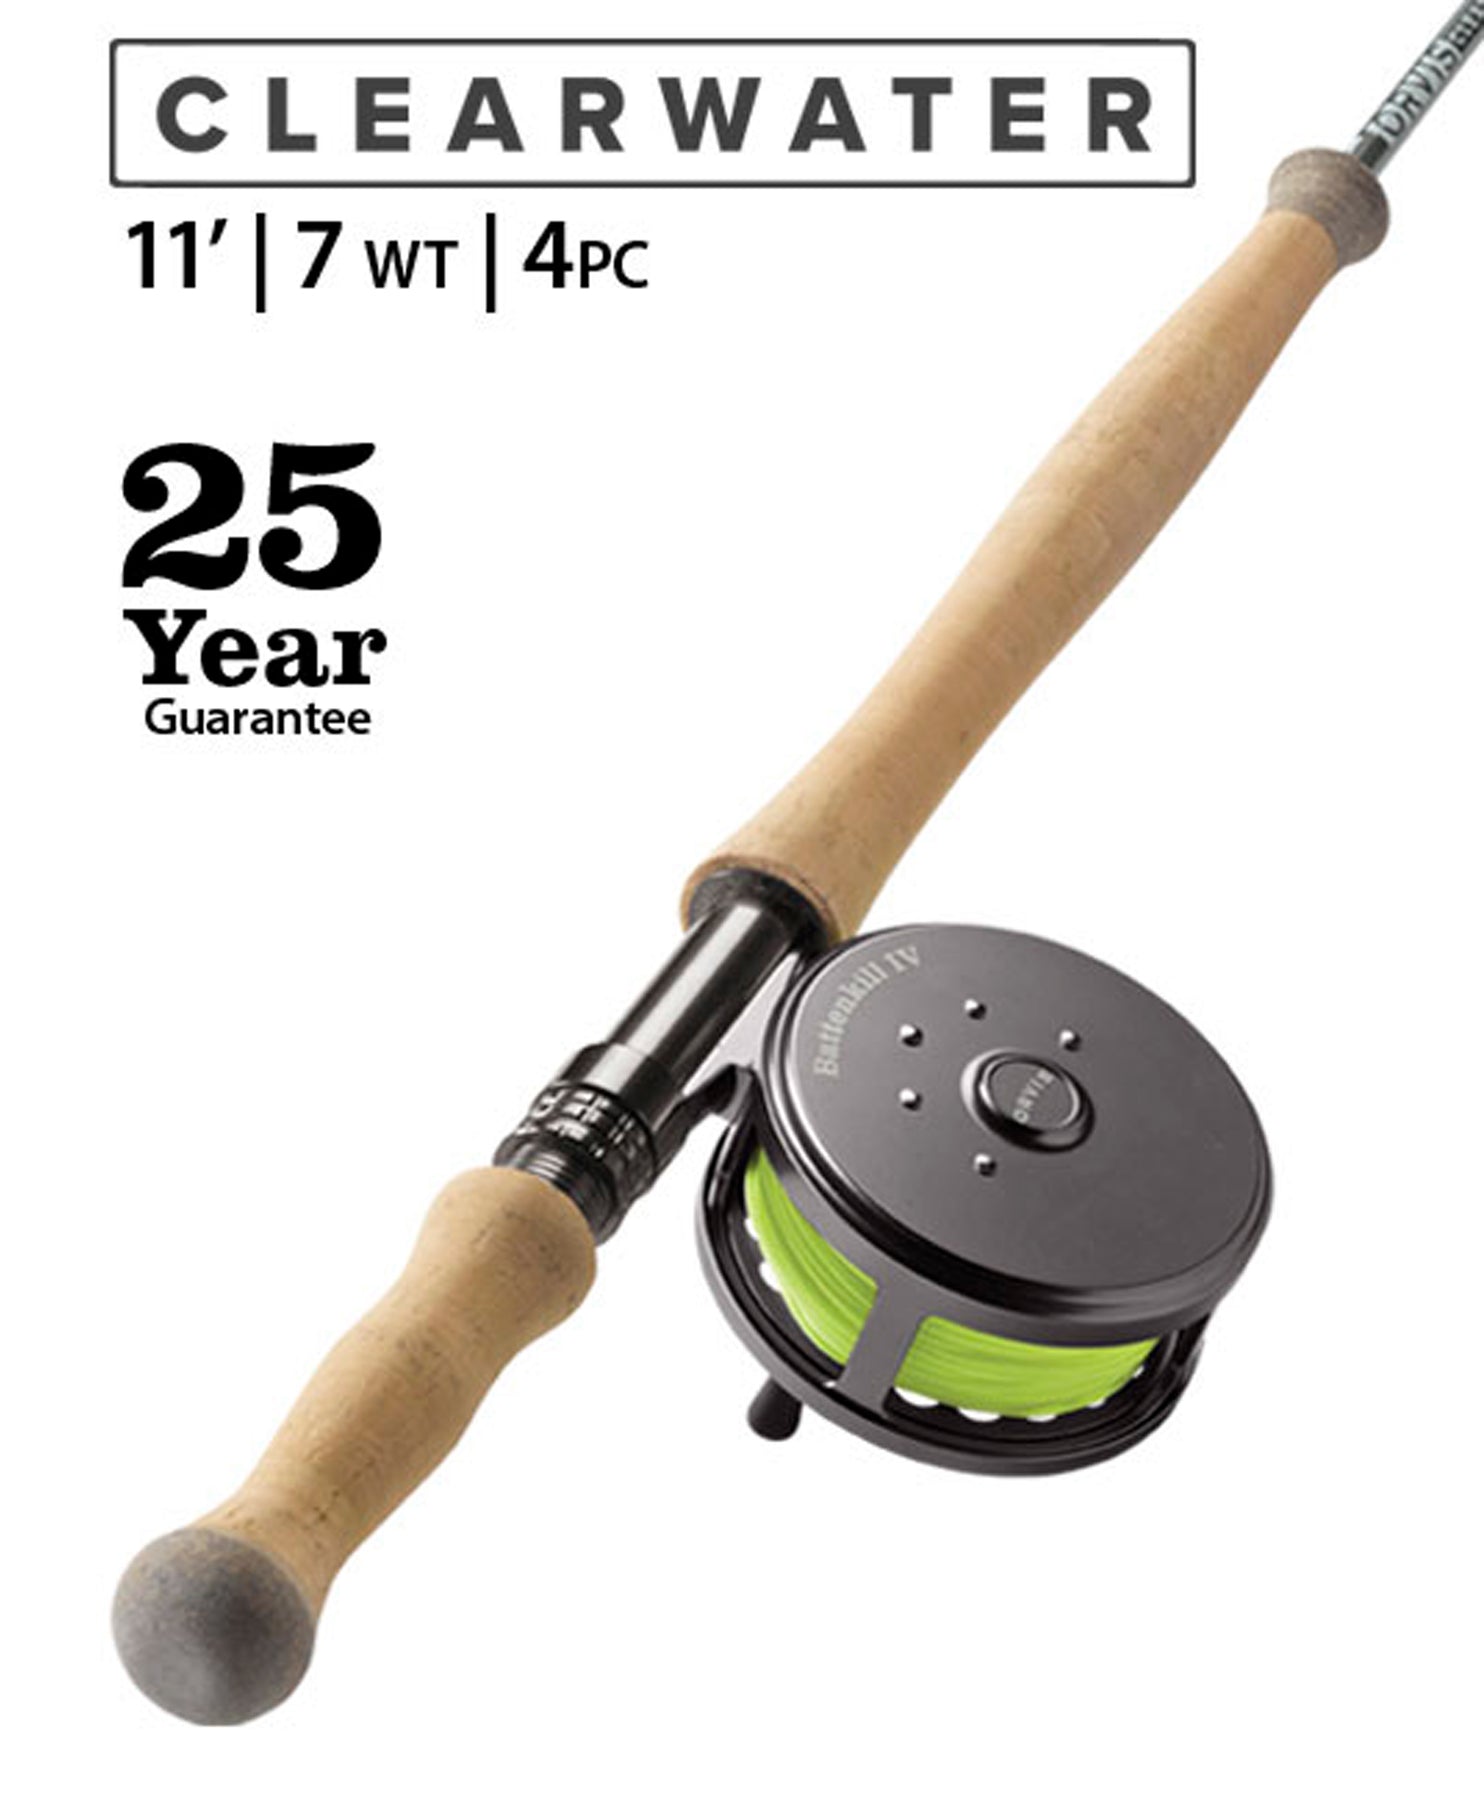 Orvis Clearwater Fly Rod Outfit - 5,6,8 Weight Fly Fishing Rod and